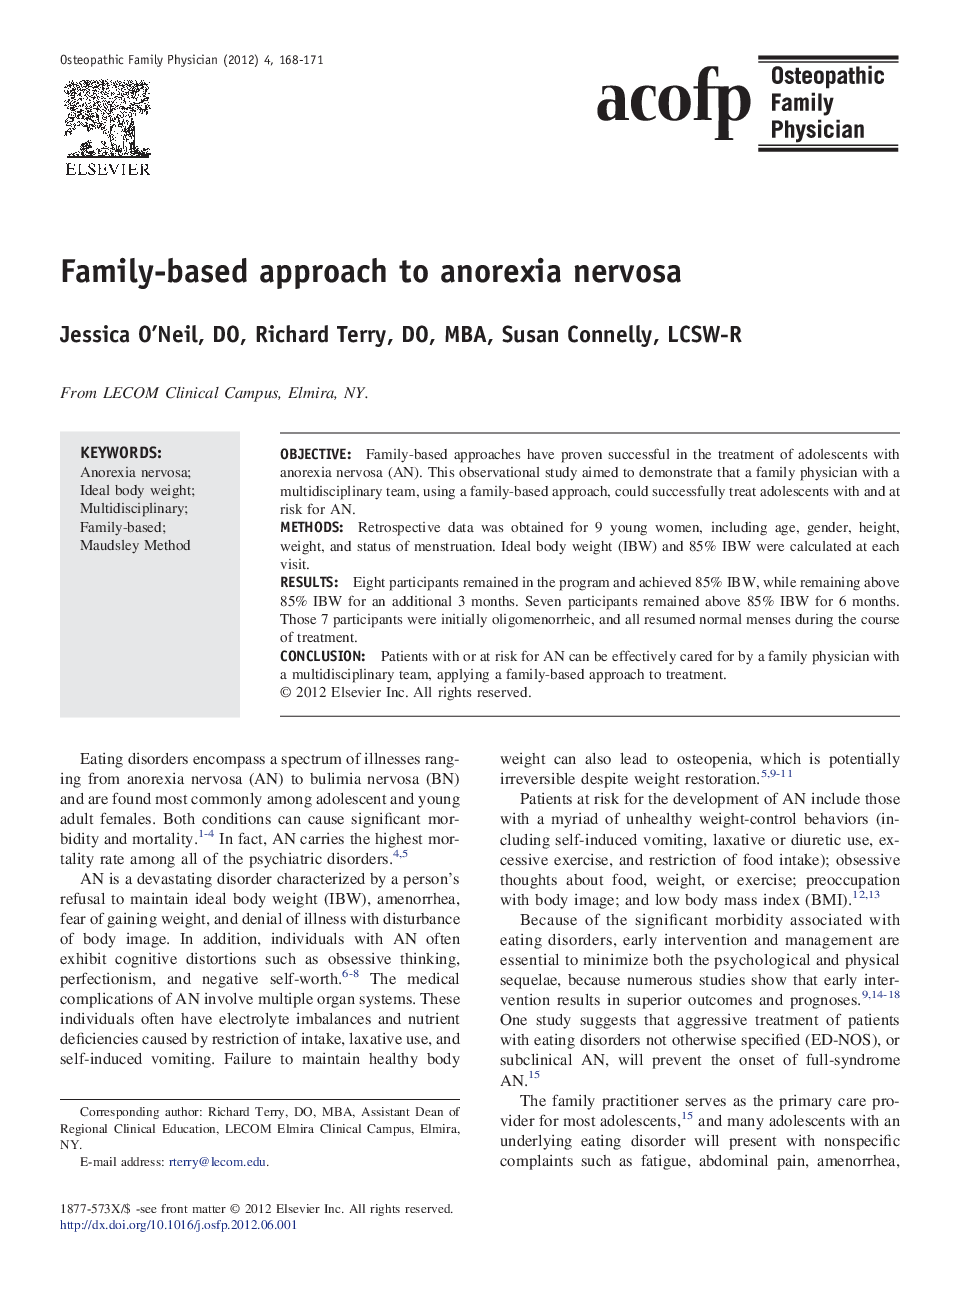 Family-based approach to anorexia nervosa